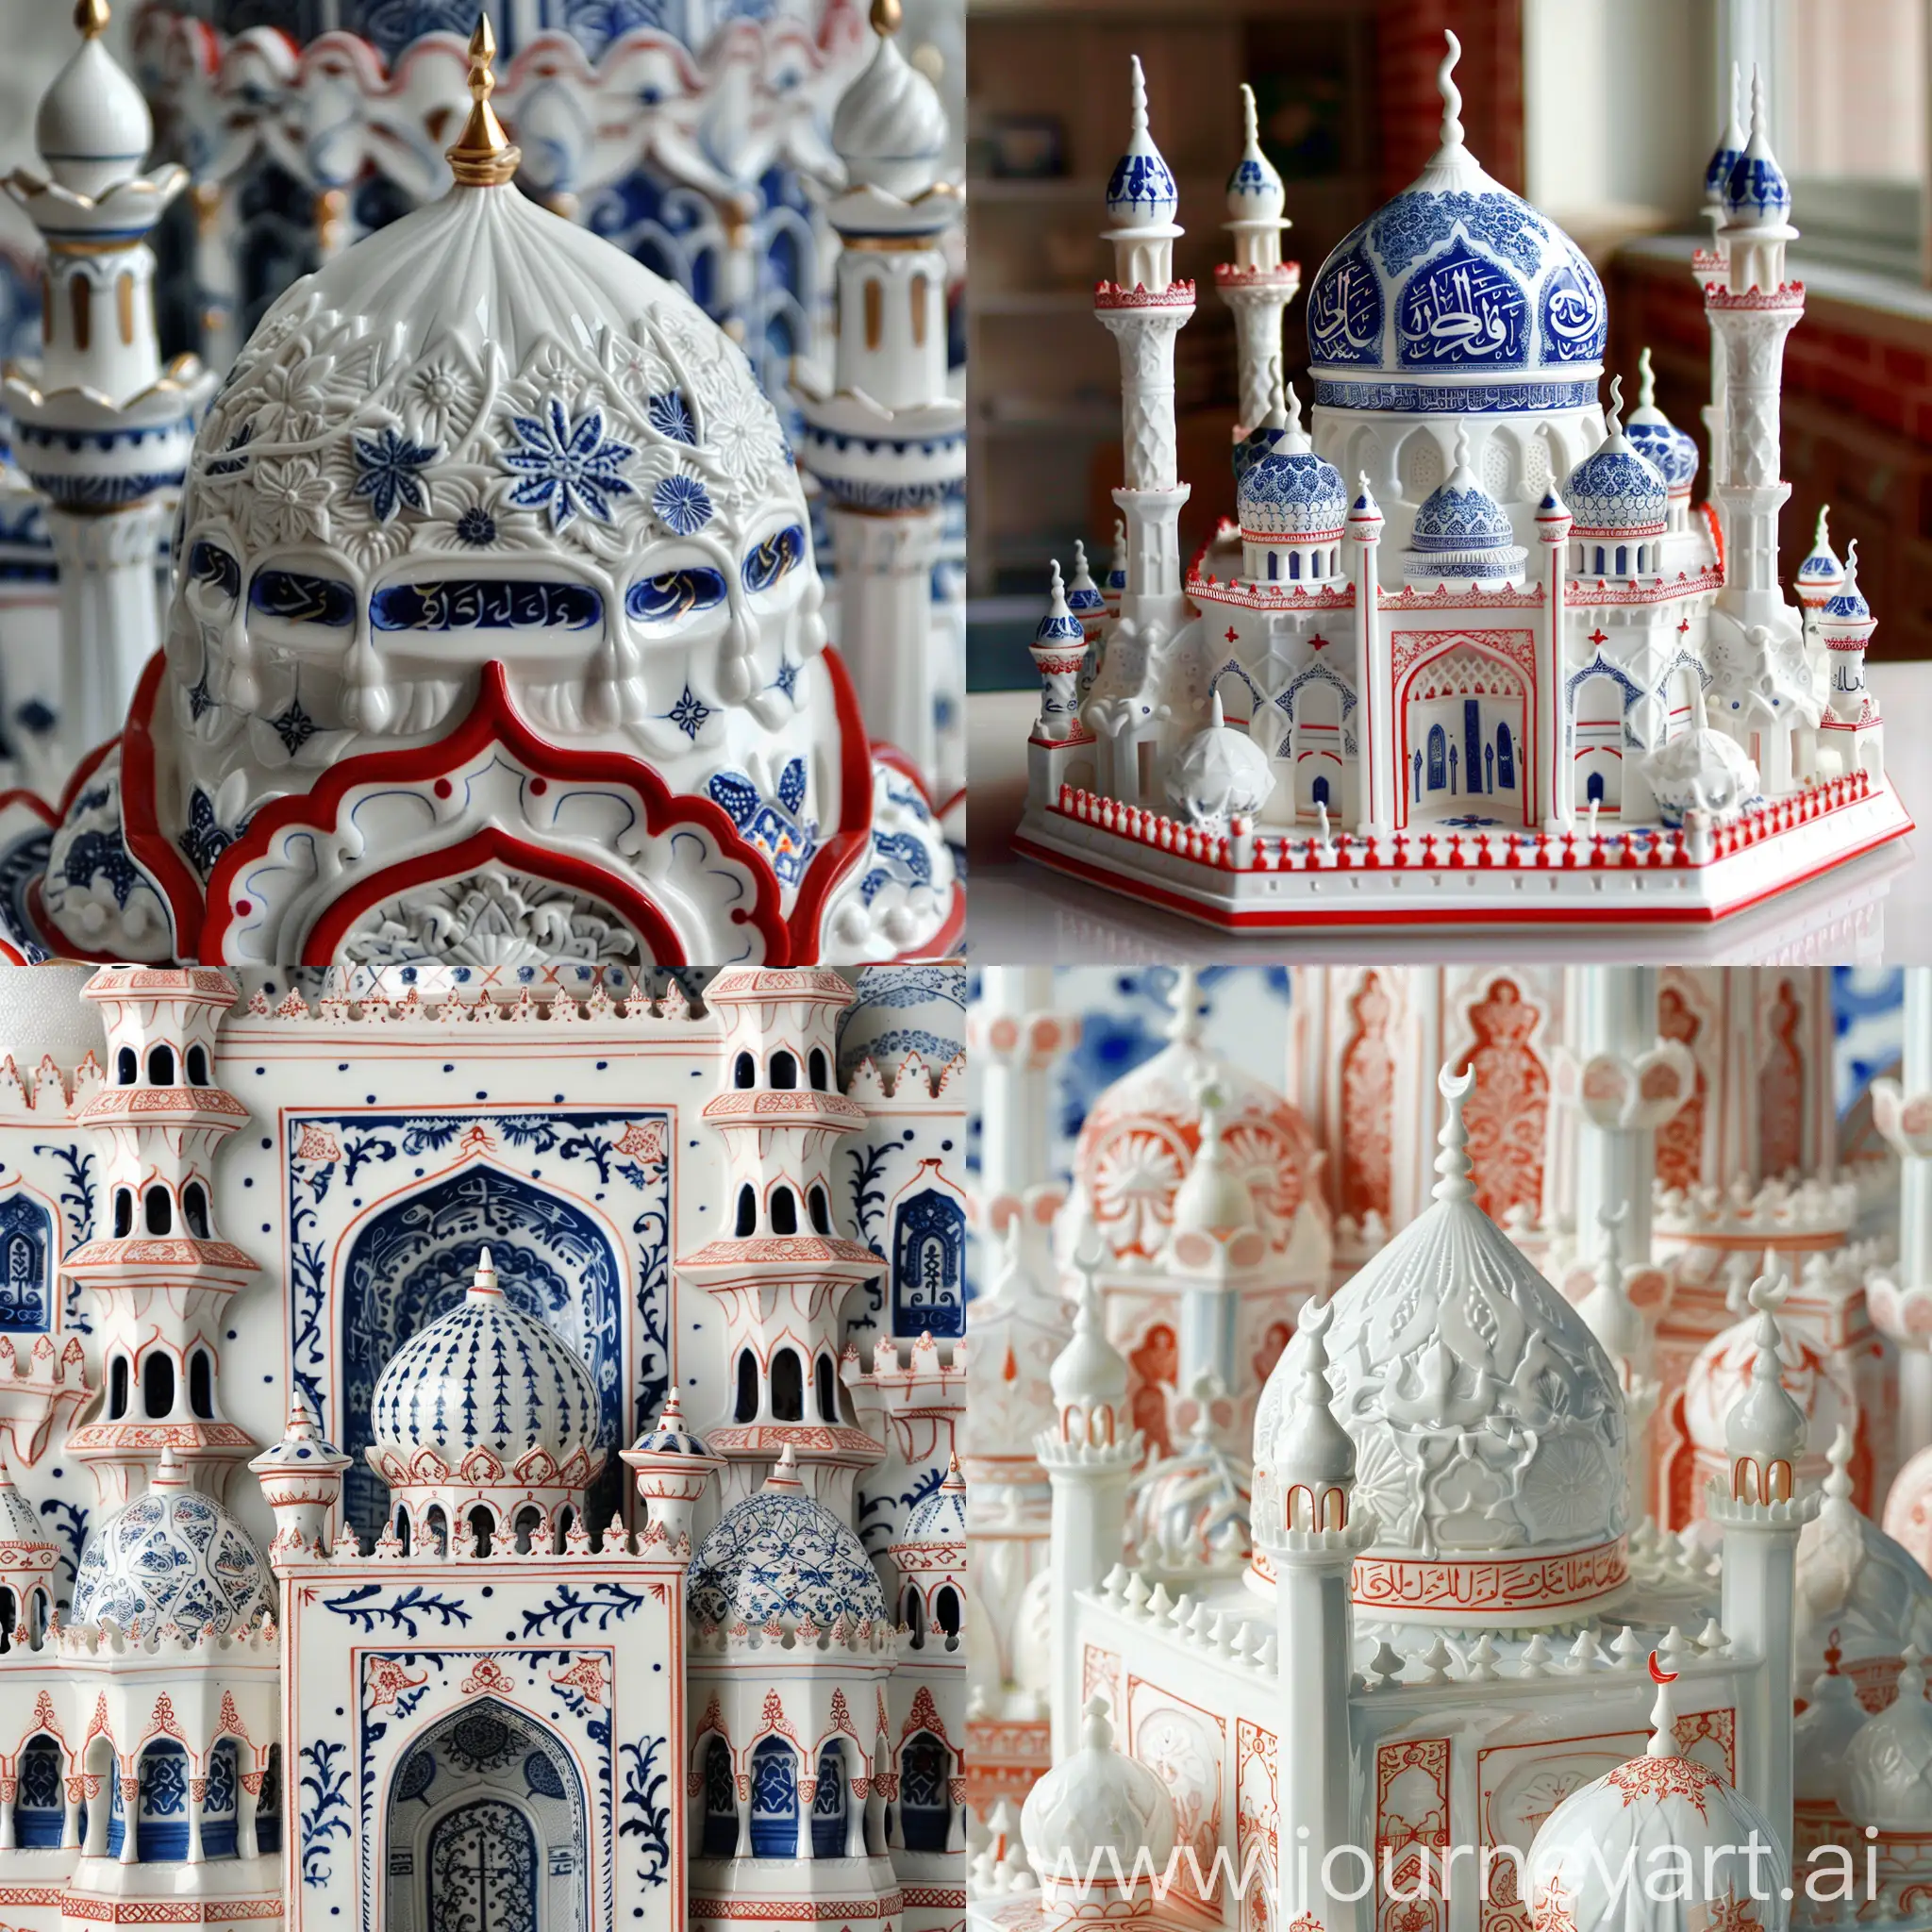 Exquisite-Porcelain-Mosque-in-China-with-Intricate-Islamic-Carvings